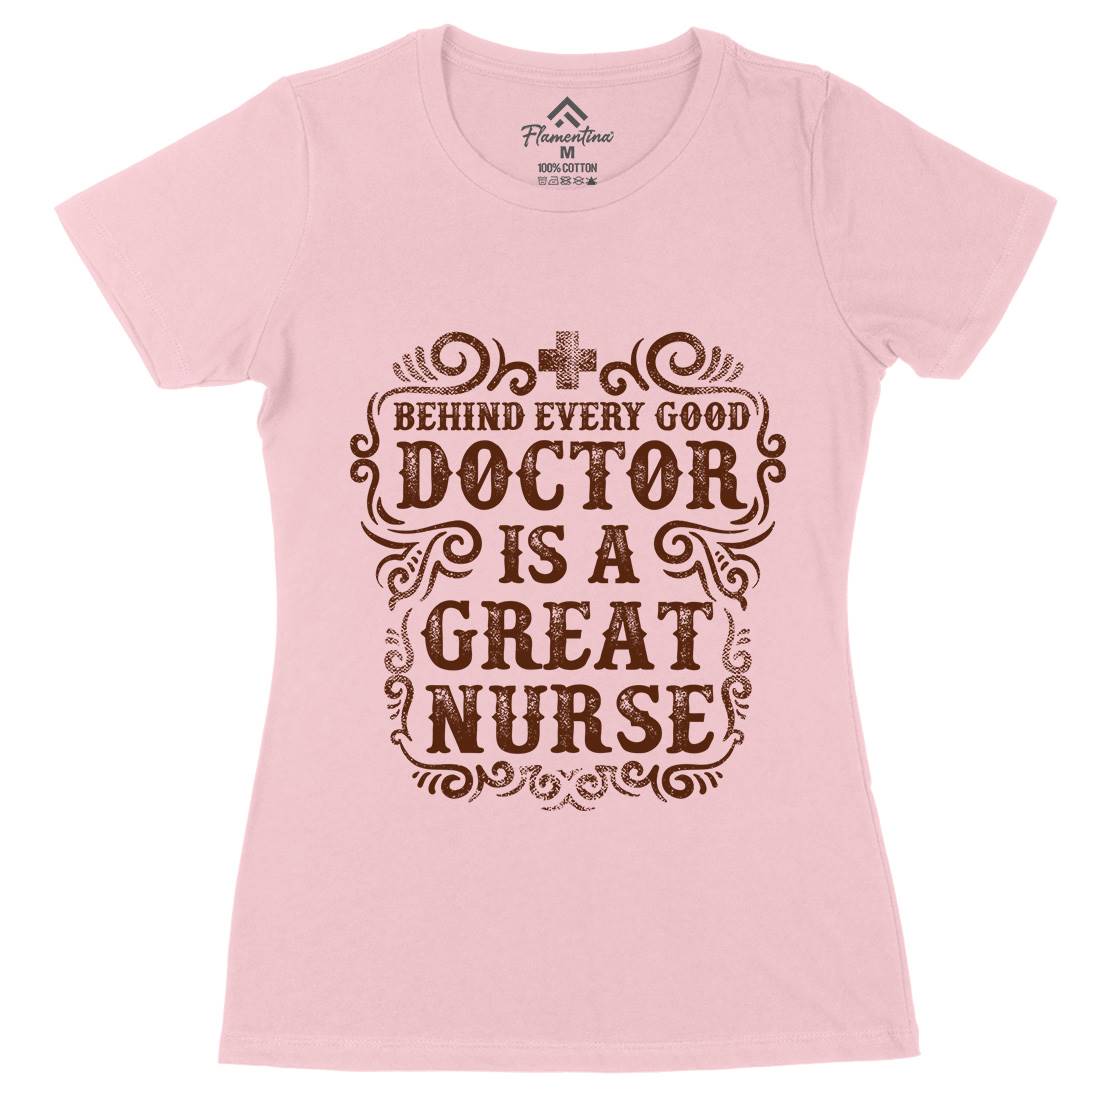 Behind Every Good Doctor Is A Great Nurse Womens Organic Crew Neck T-Shirt Work C910